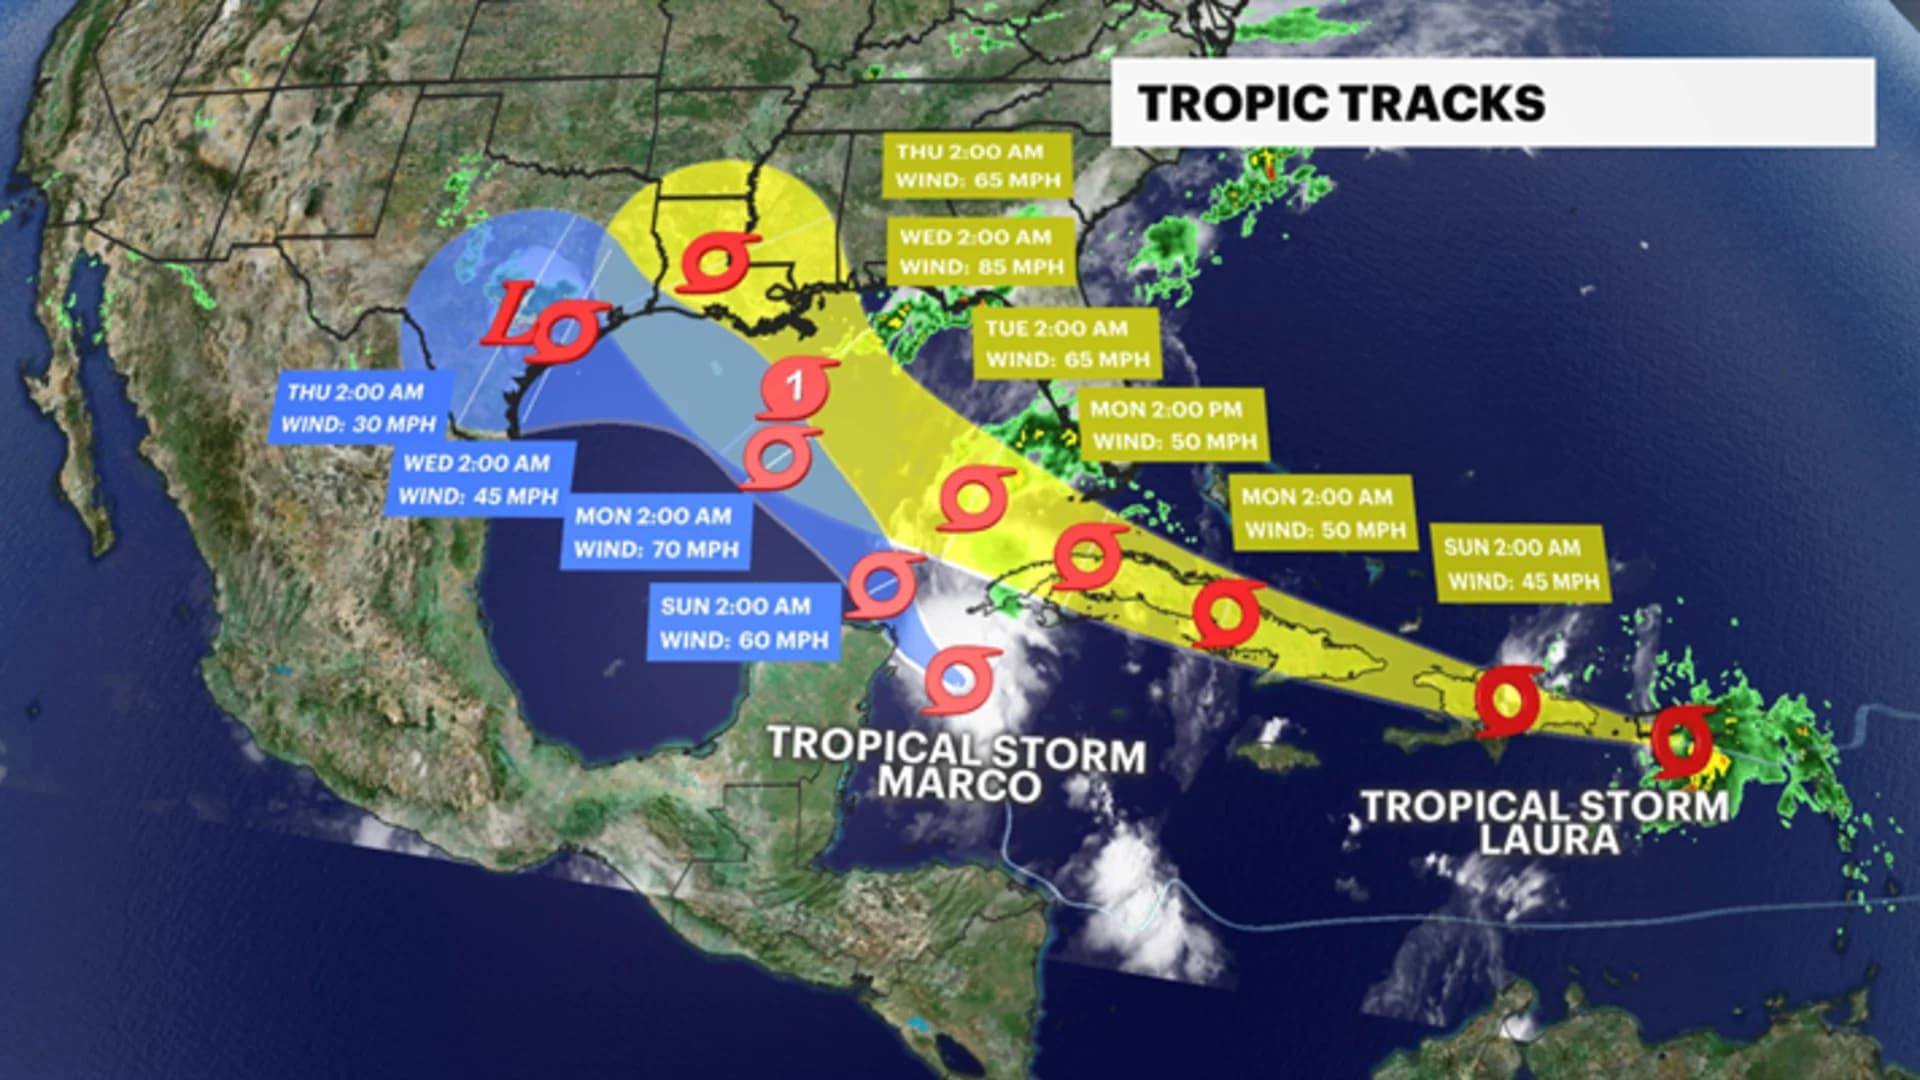 Tropical Tracker: Track storm activity and expected paths